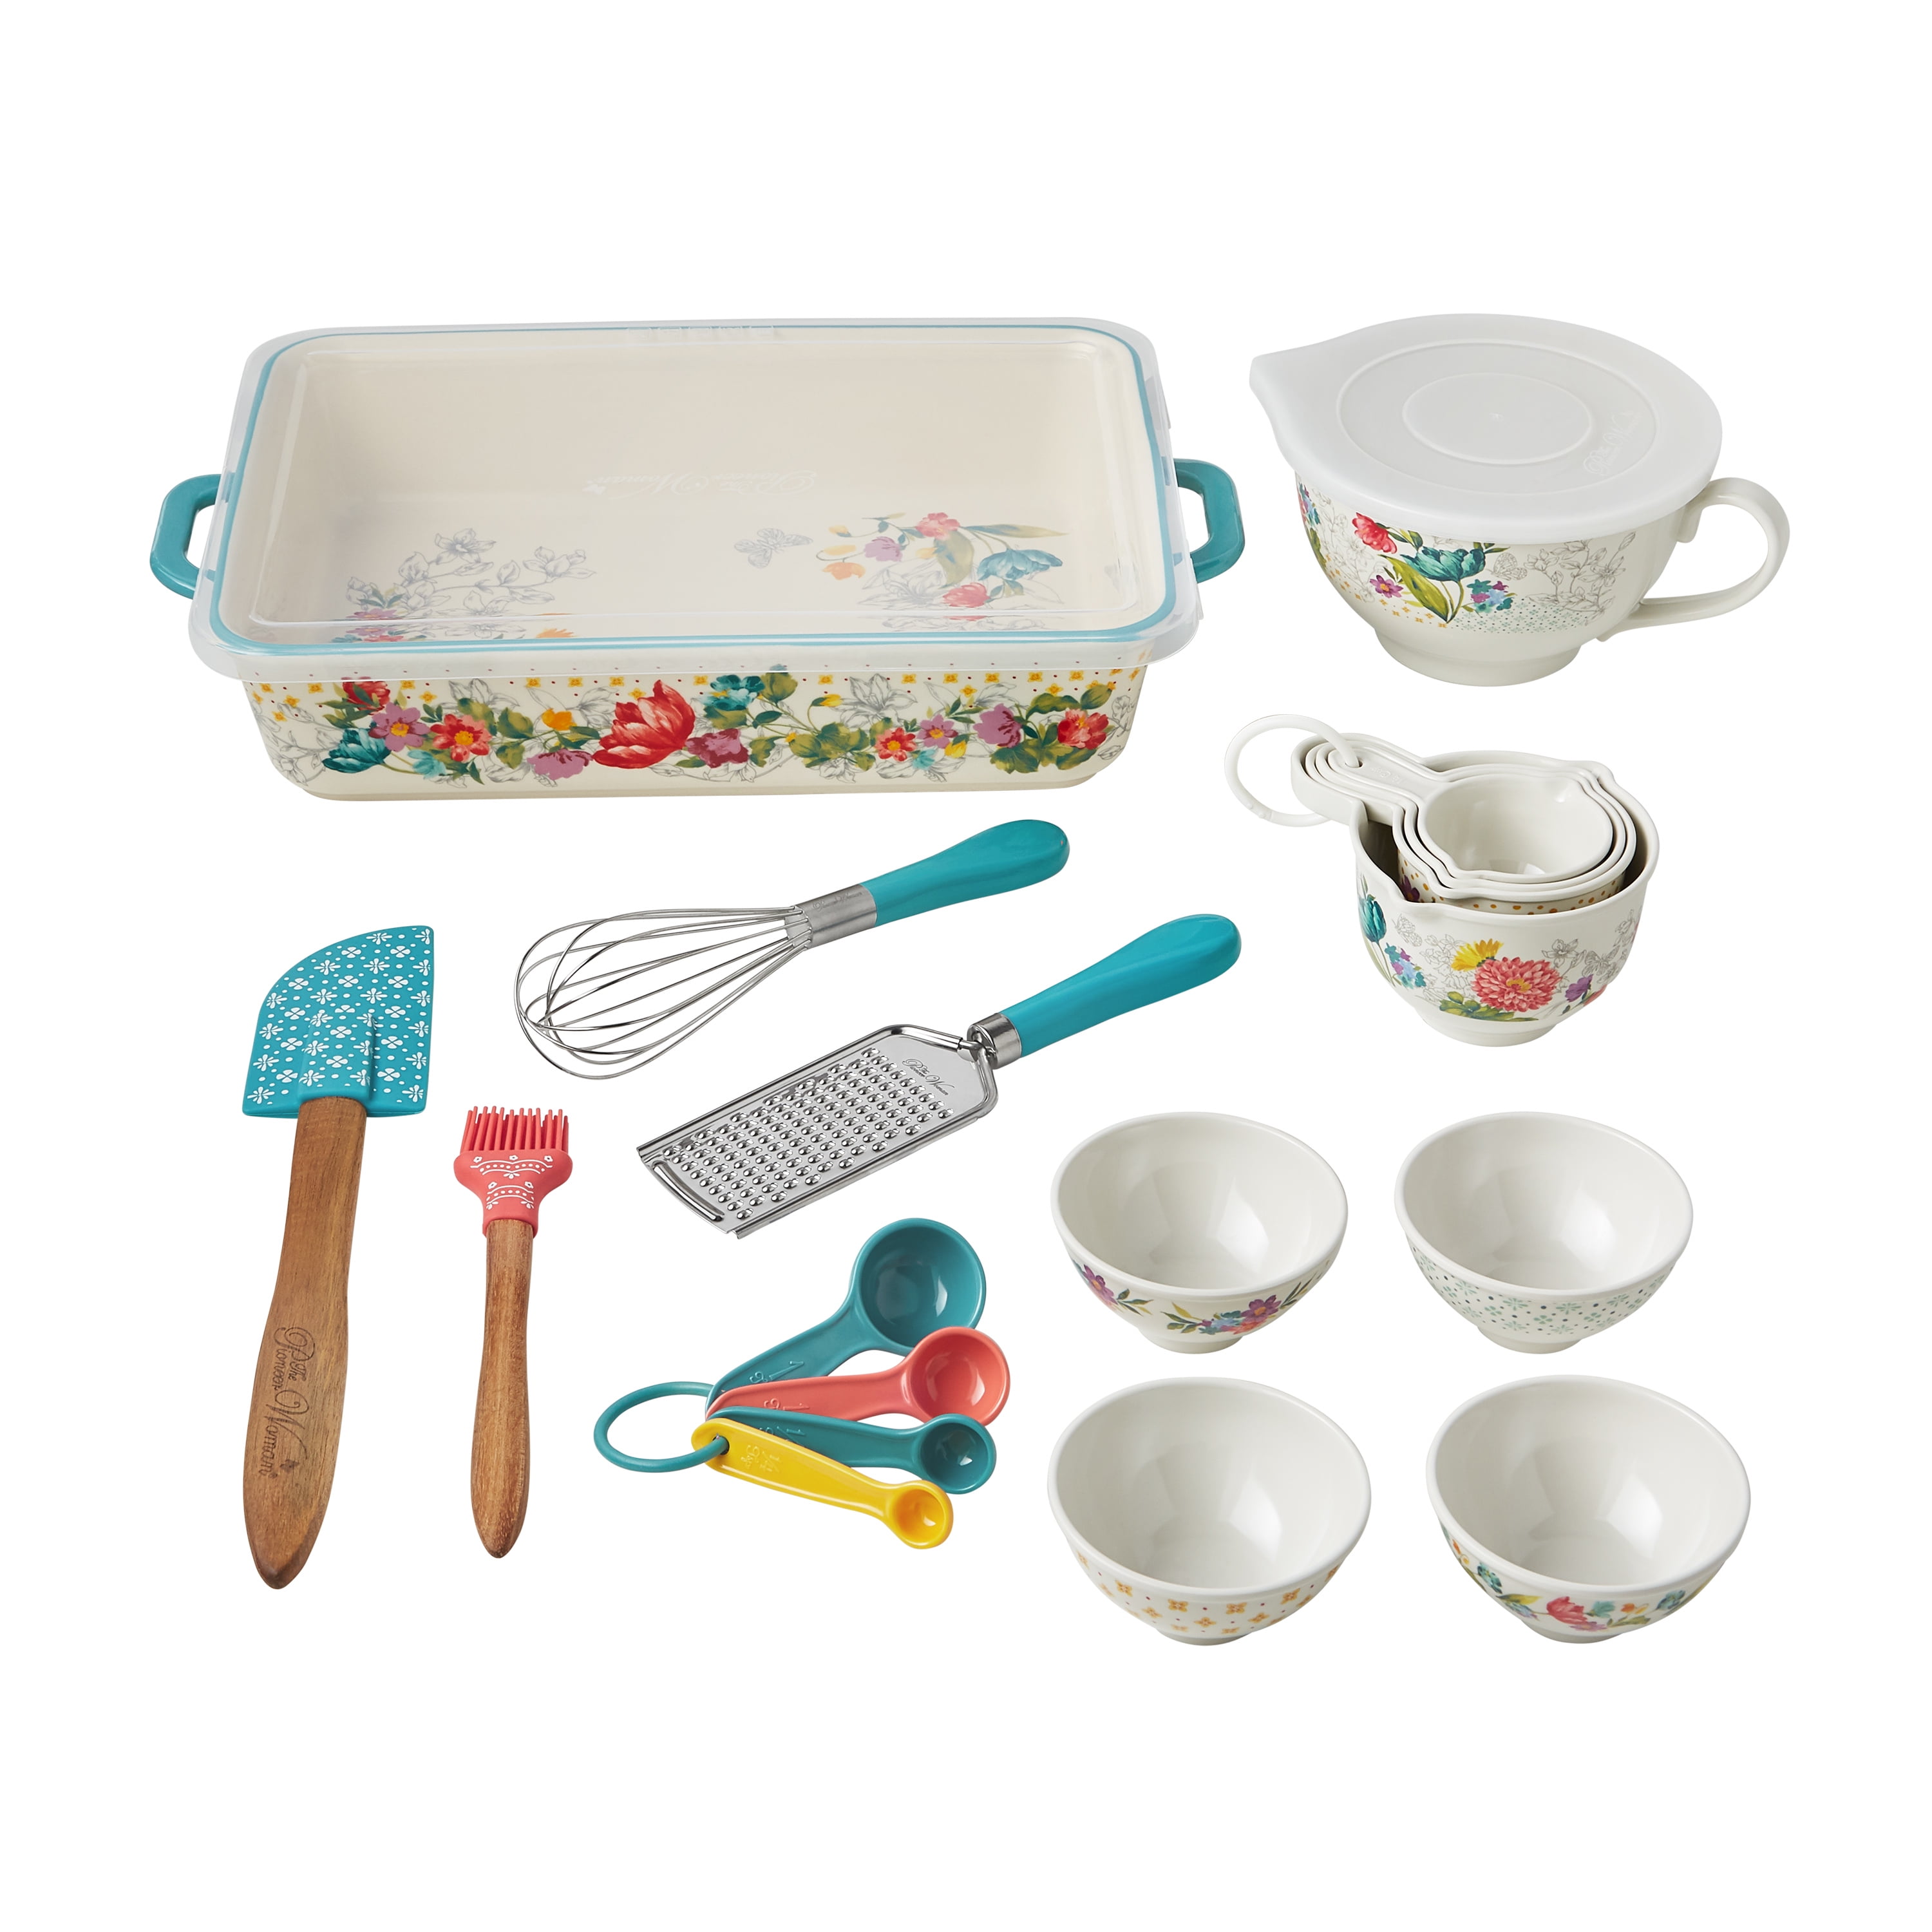 The Pioneer Woman Blooming Bouquet 20-Piece Bake & Prep Set with Baking Dish & Measuring Cups